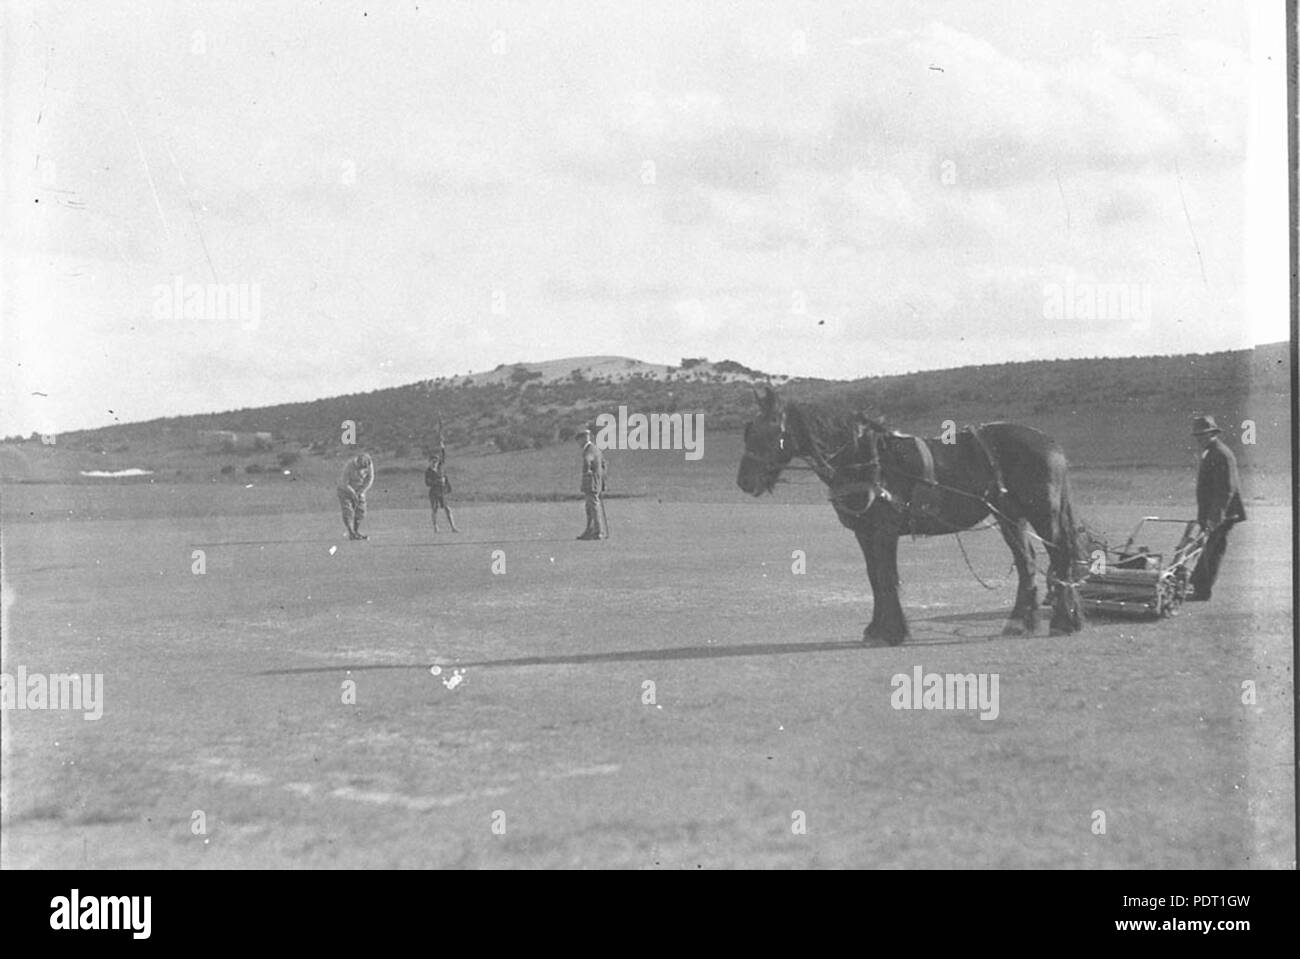 190 SLNSW 8483 The horsedrawn mower makes a vignette of a player putting Stock Photo